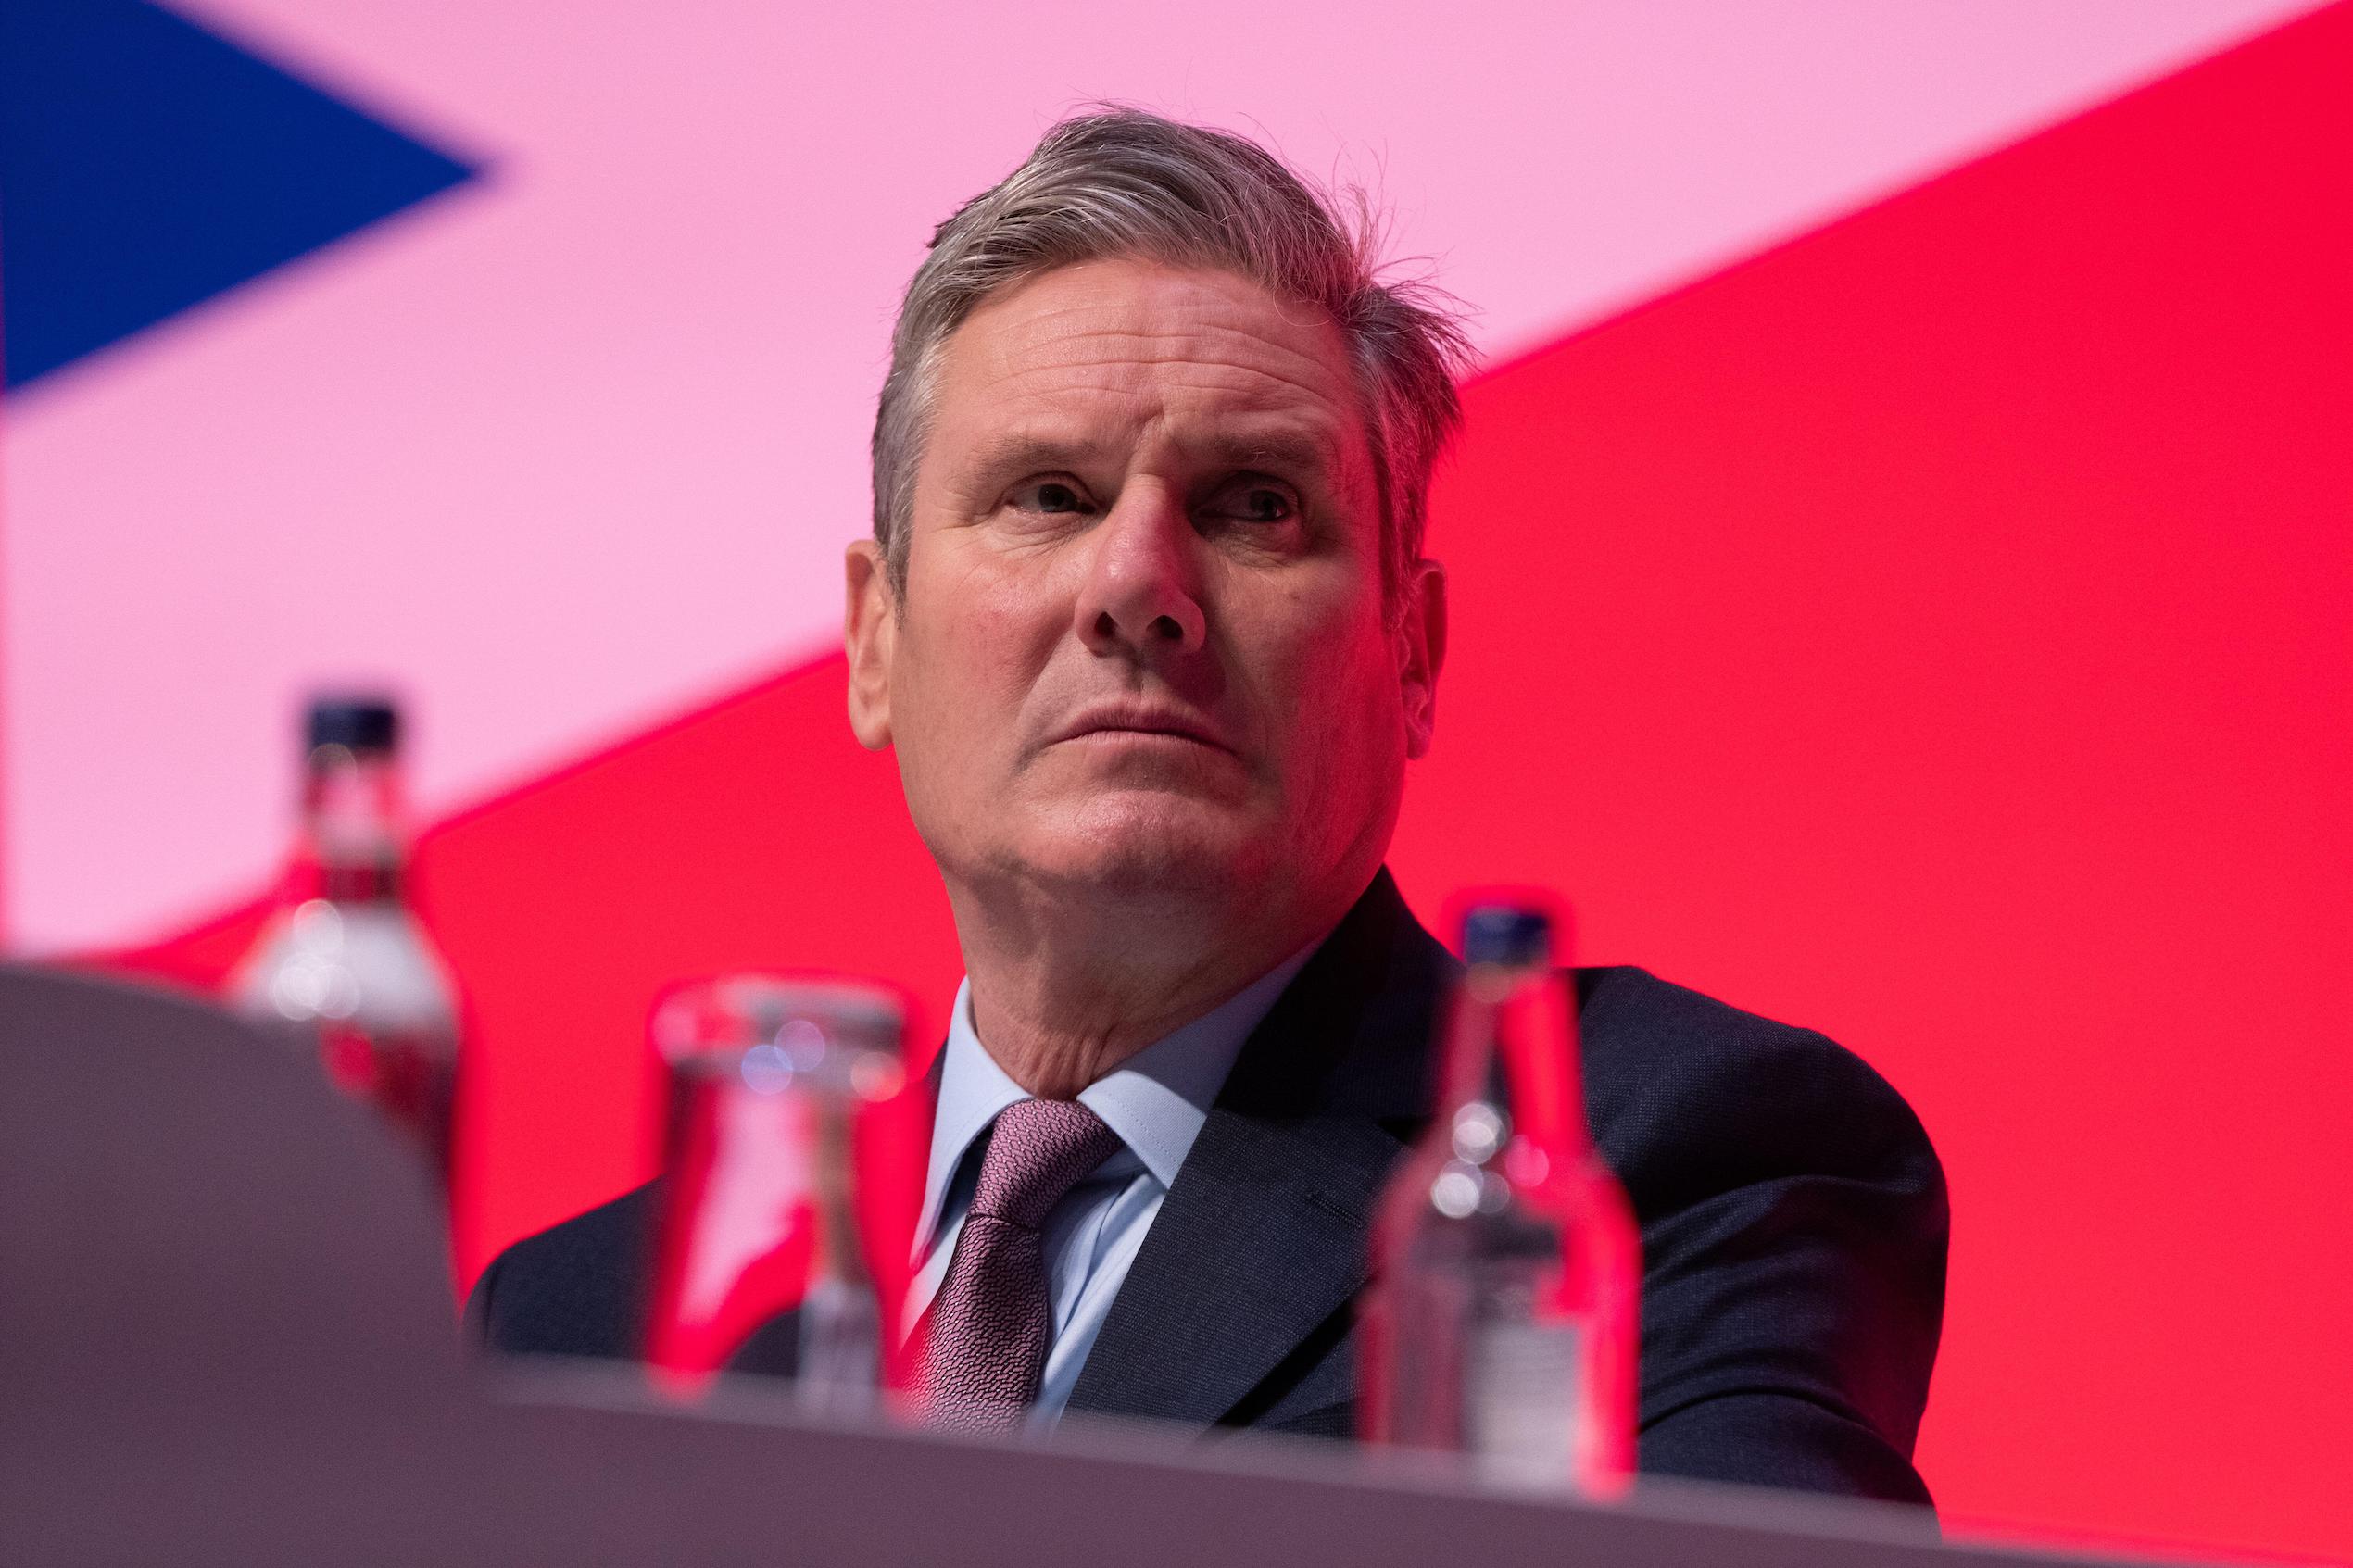 Keir Starmer at Labour Party conference.